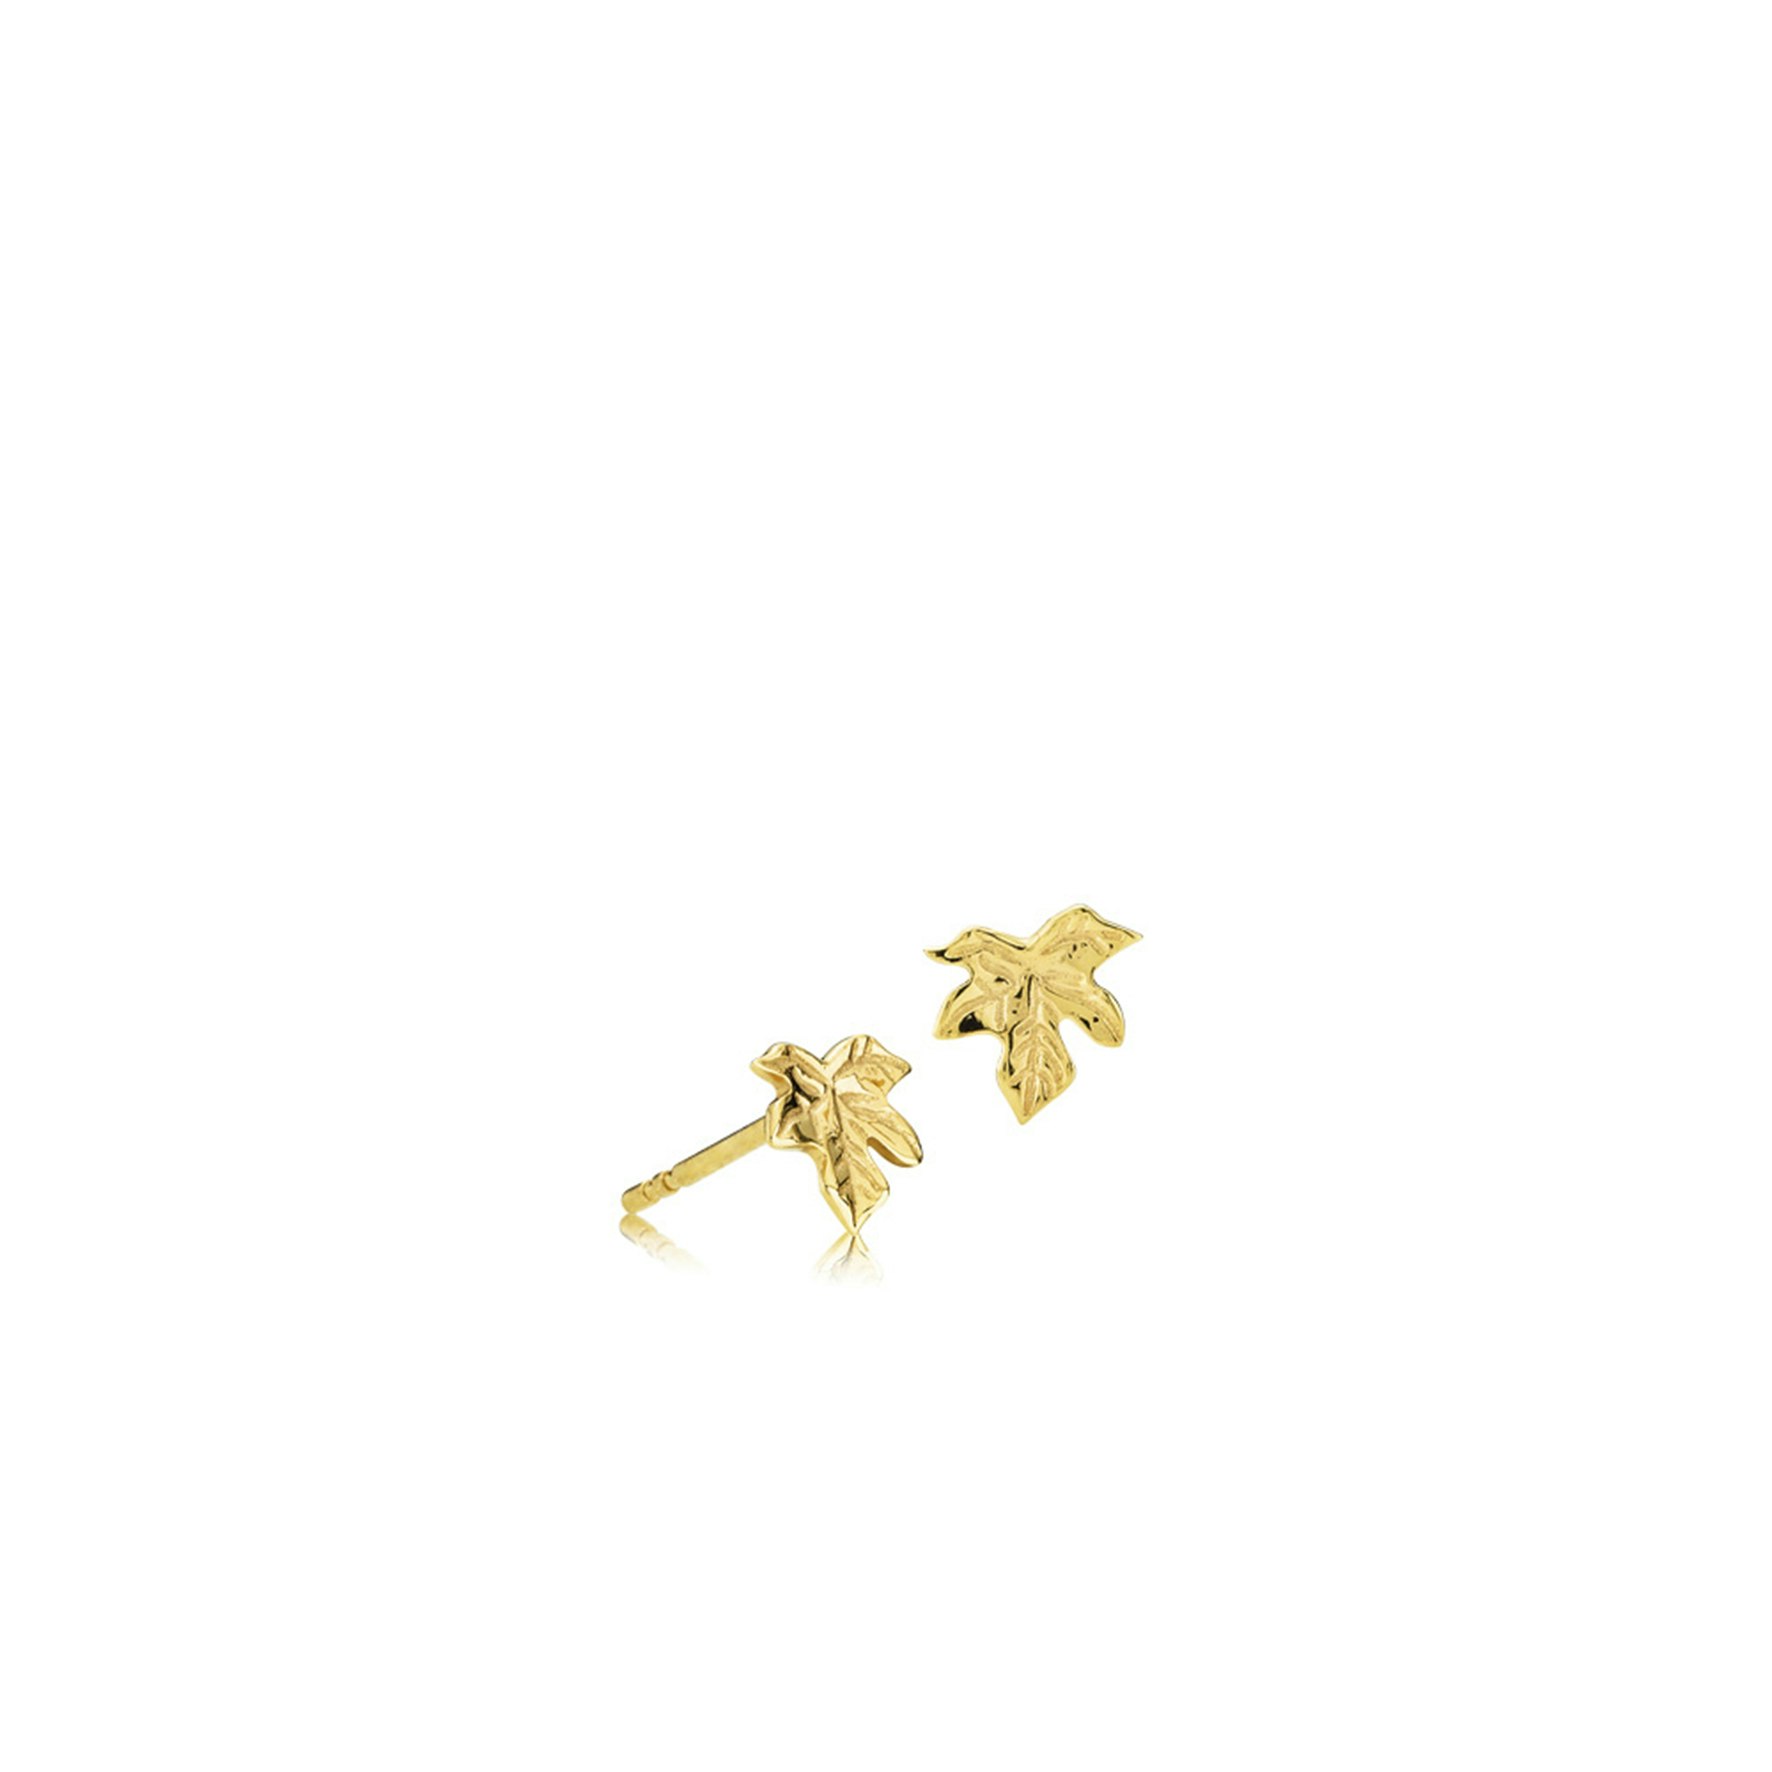 Caley Earsticks from Izabel Camille in Goldplated Silver Sterling 925